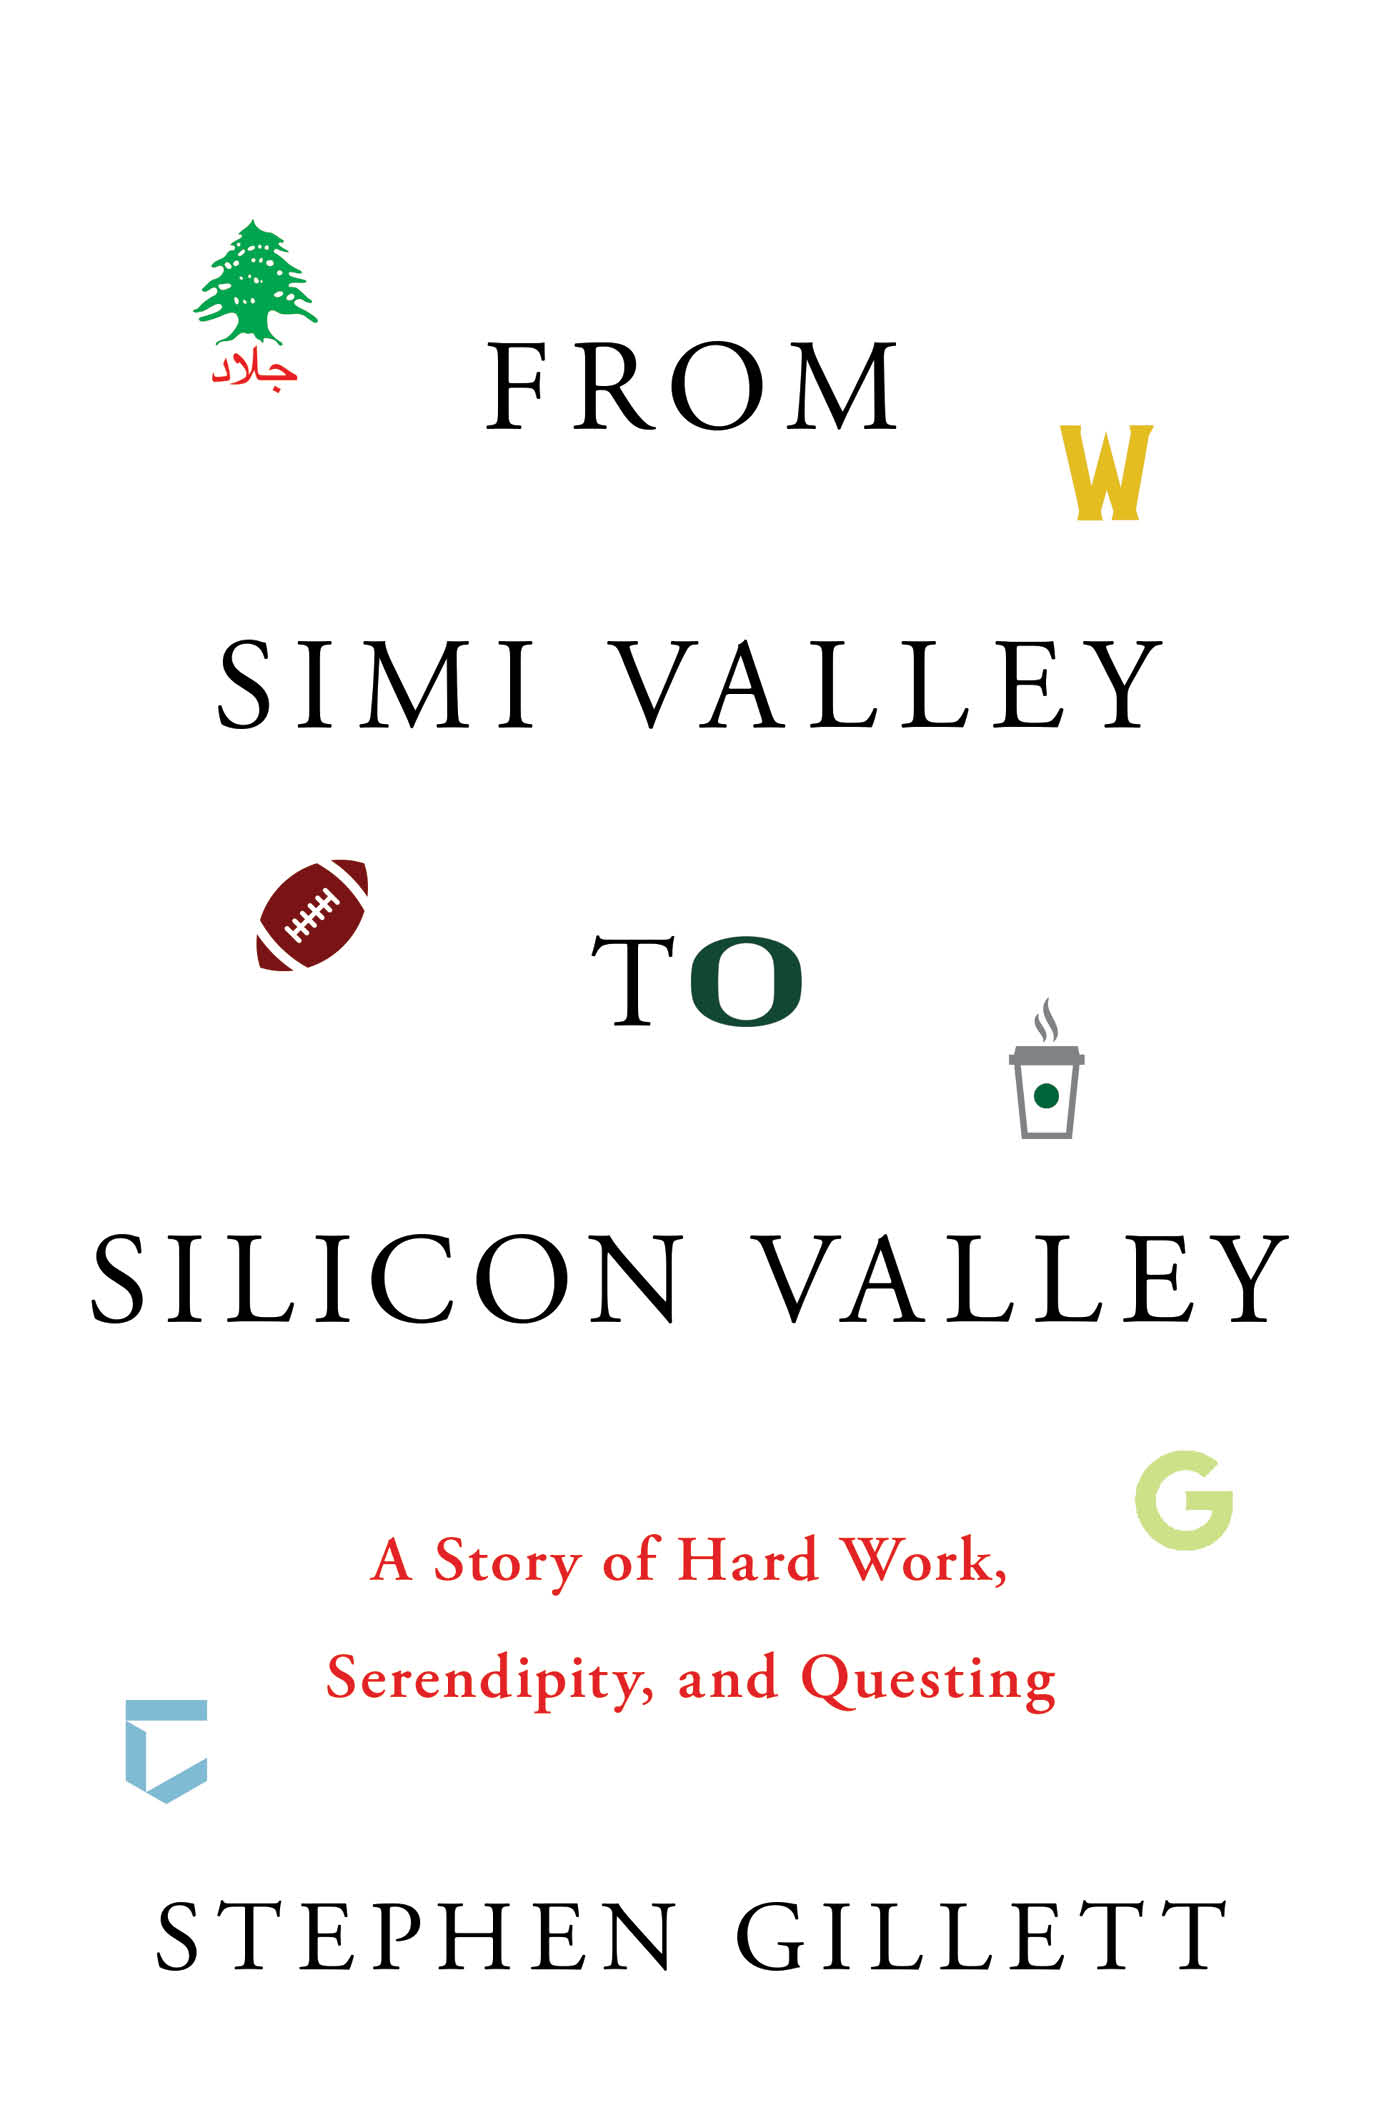 From Simi Valley to Silicon Valley